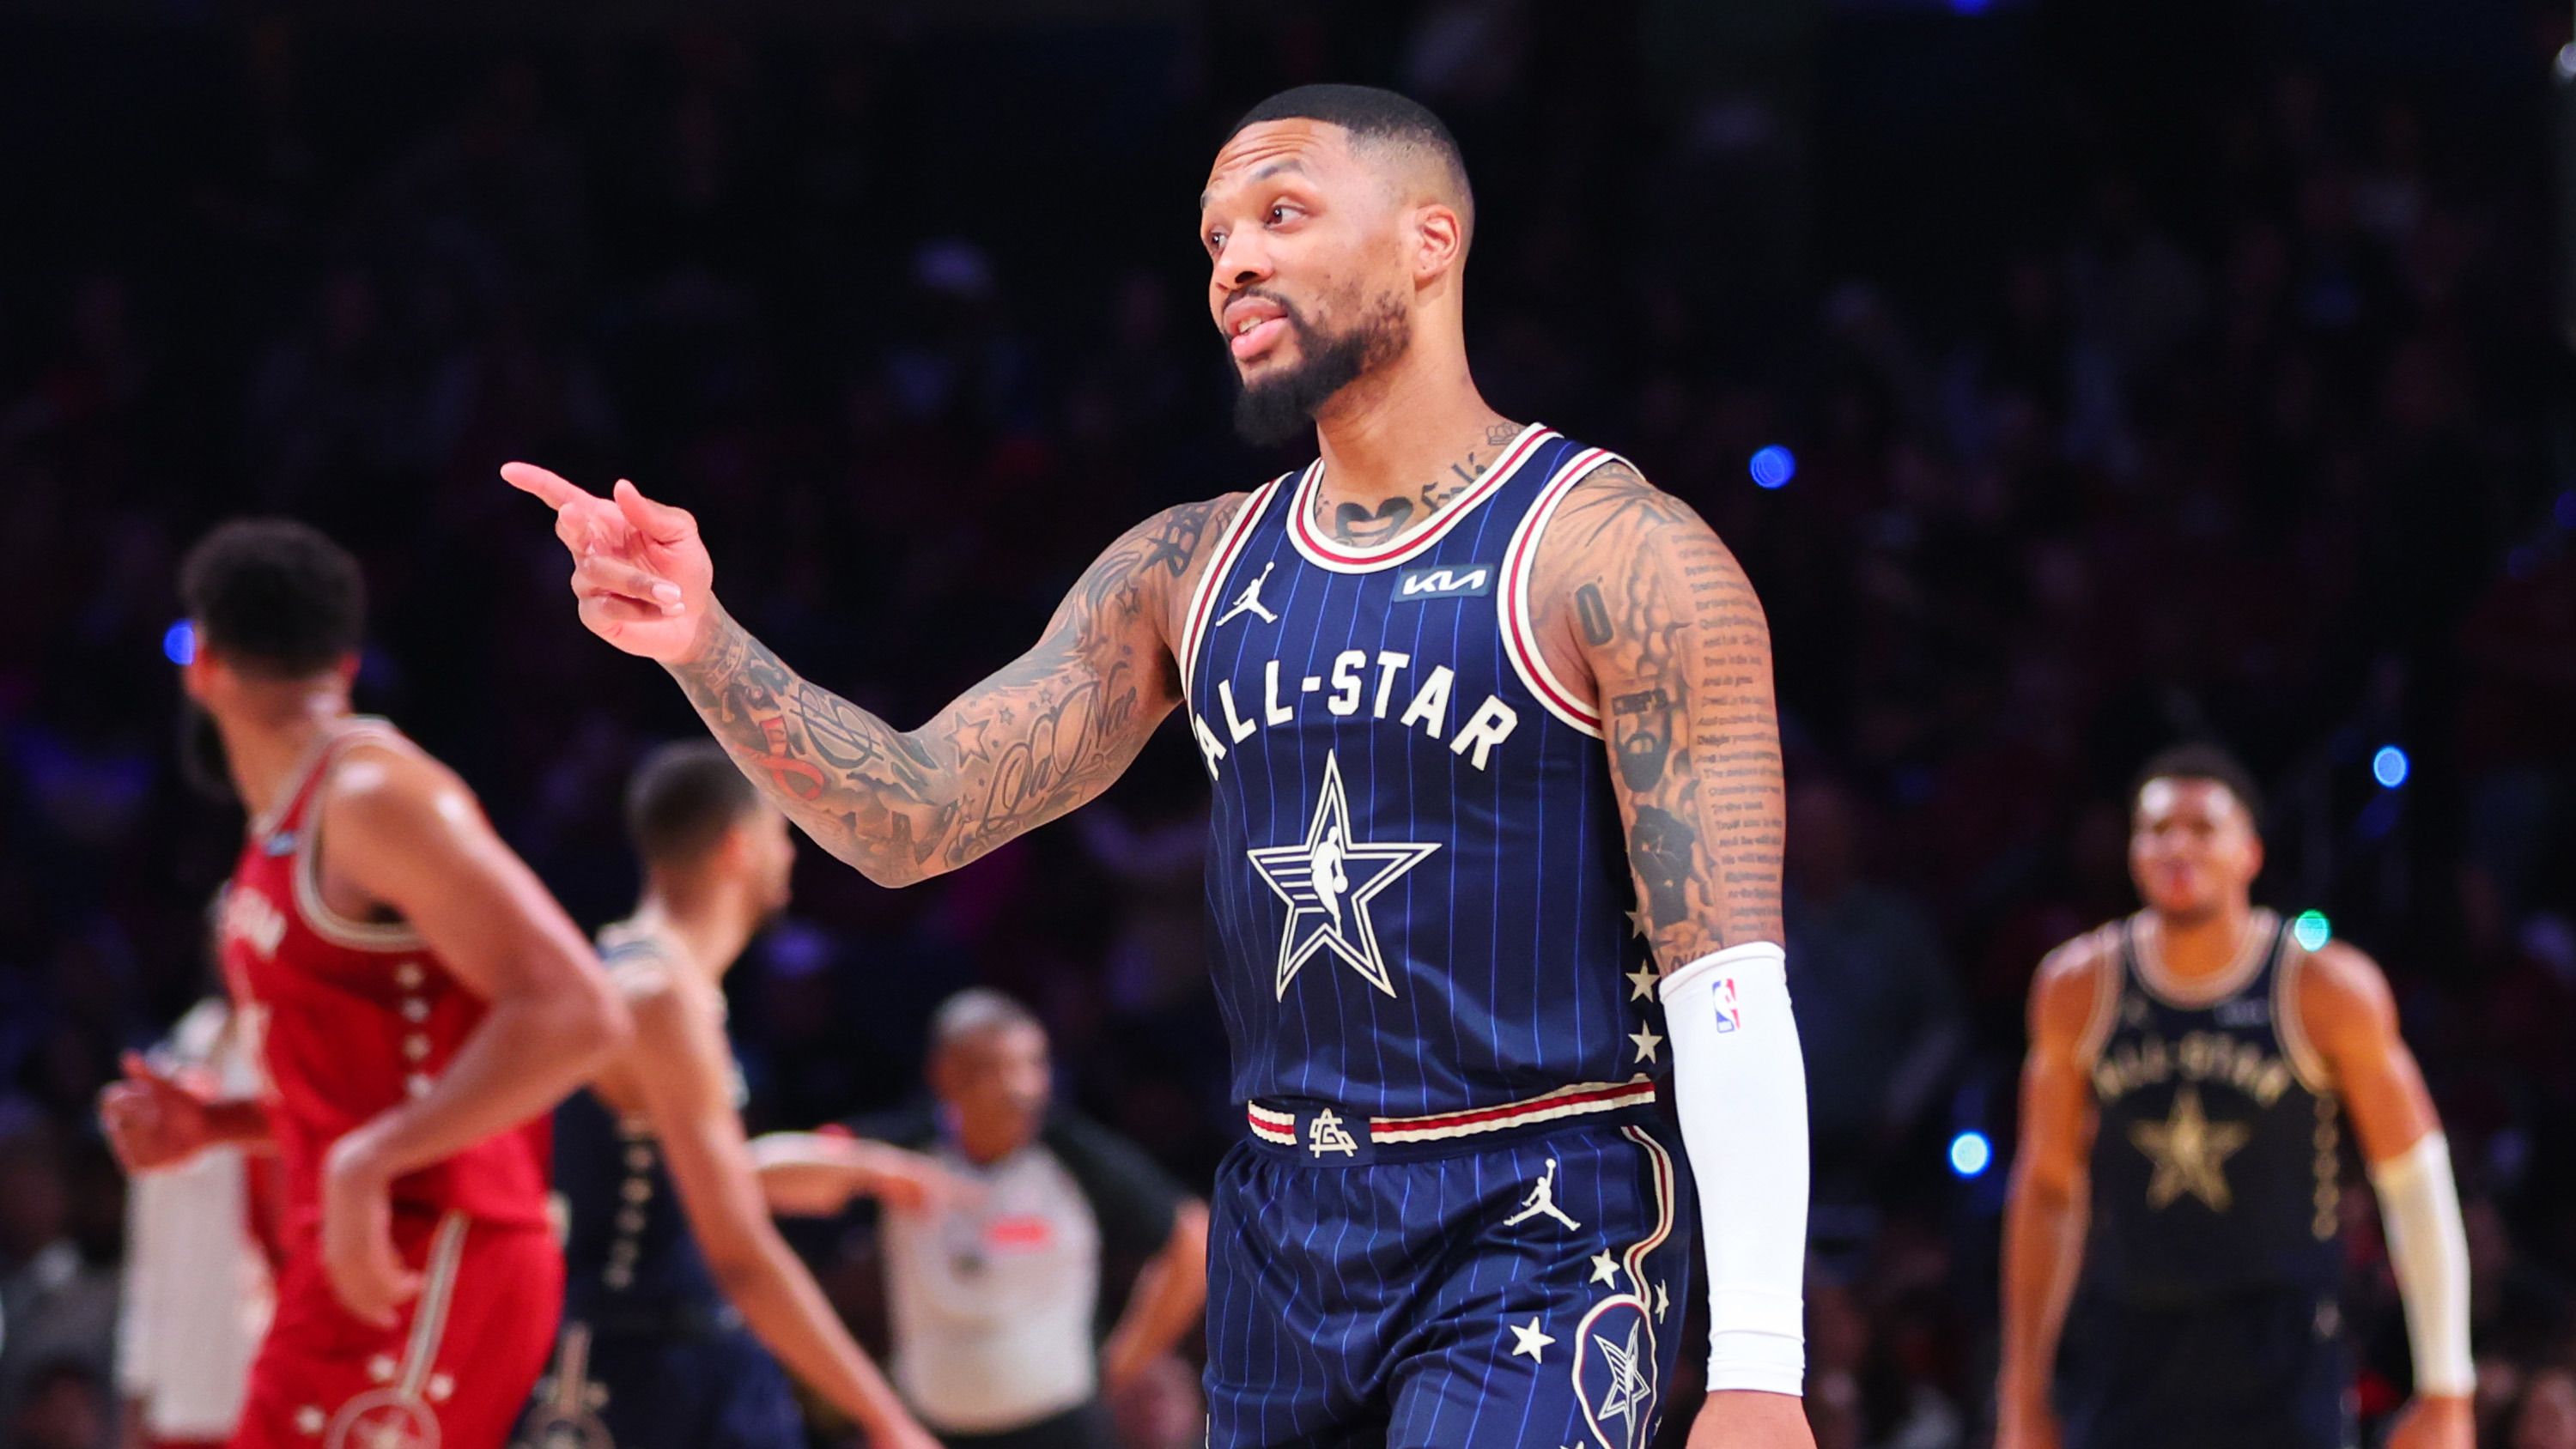 'Worst sporting event ever': Records fall in NBA All Stars game as players ripped over 'disgraceful farce'